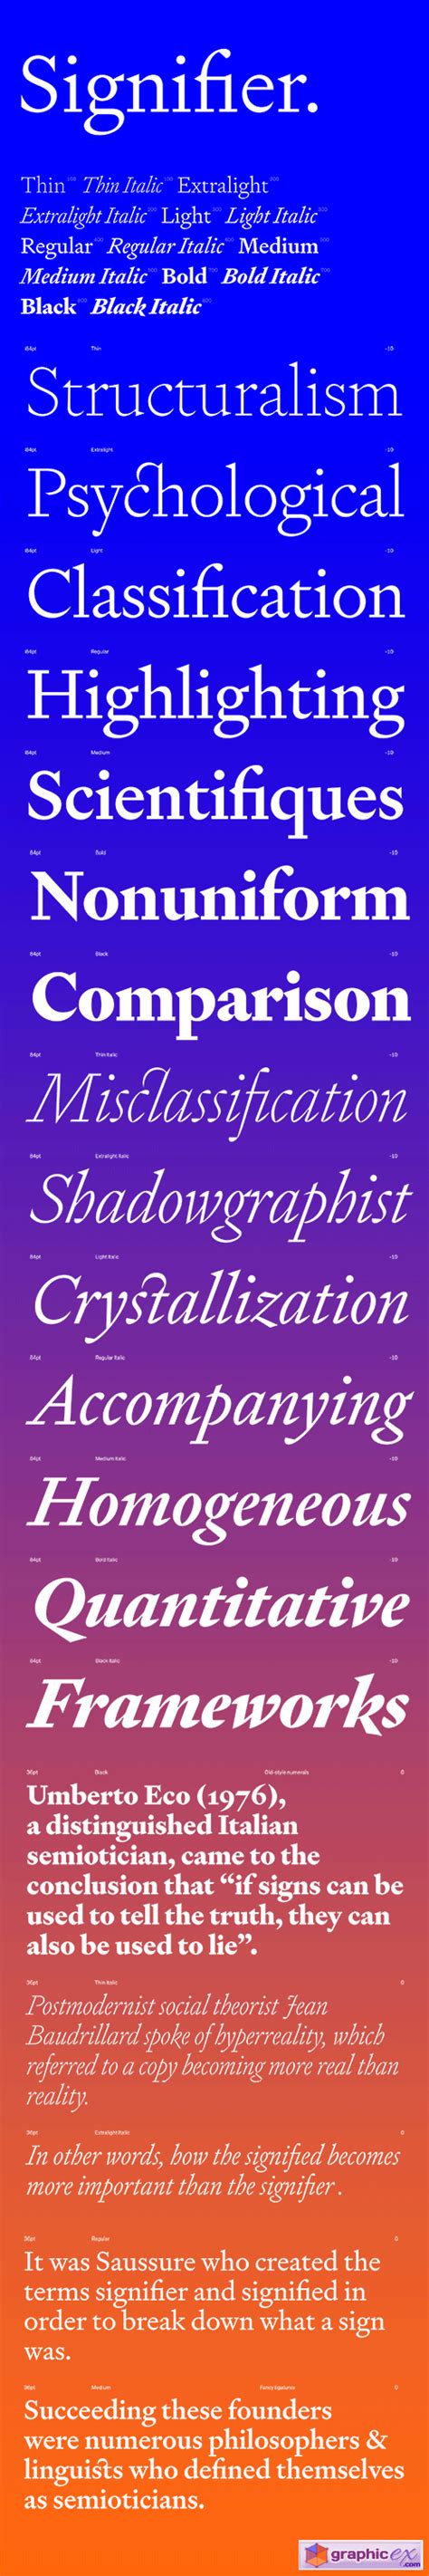 Signifier Font Free Download